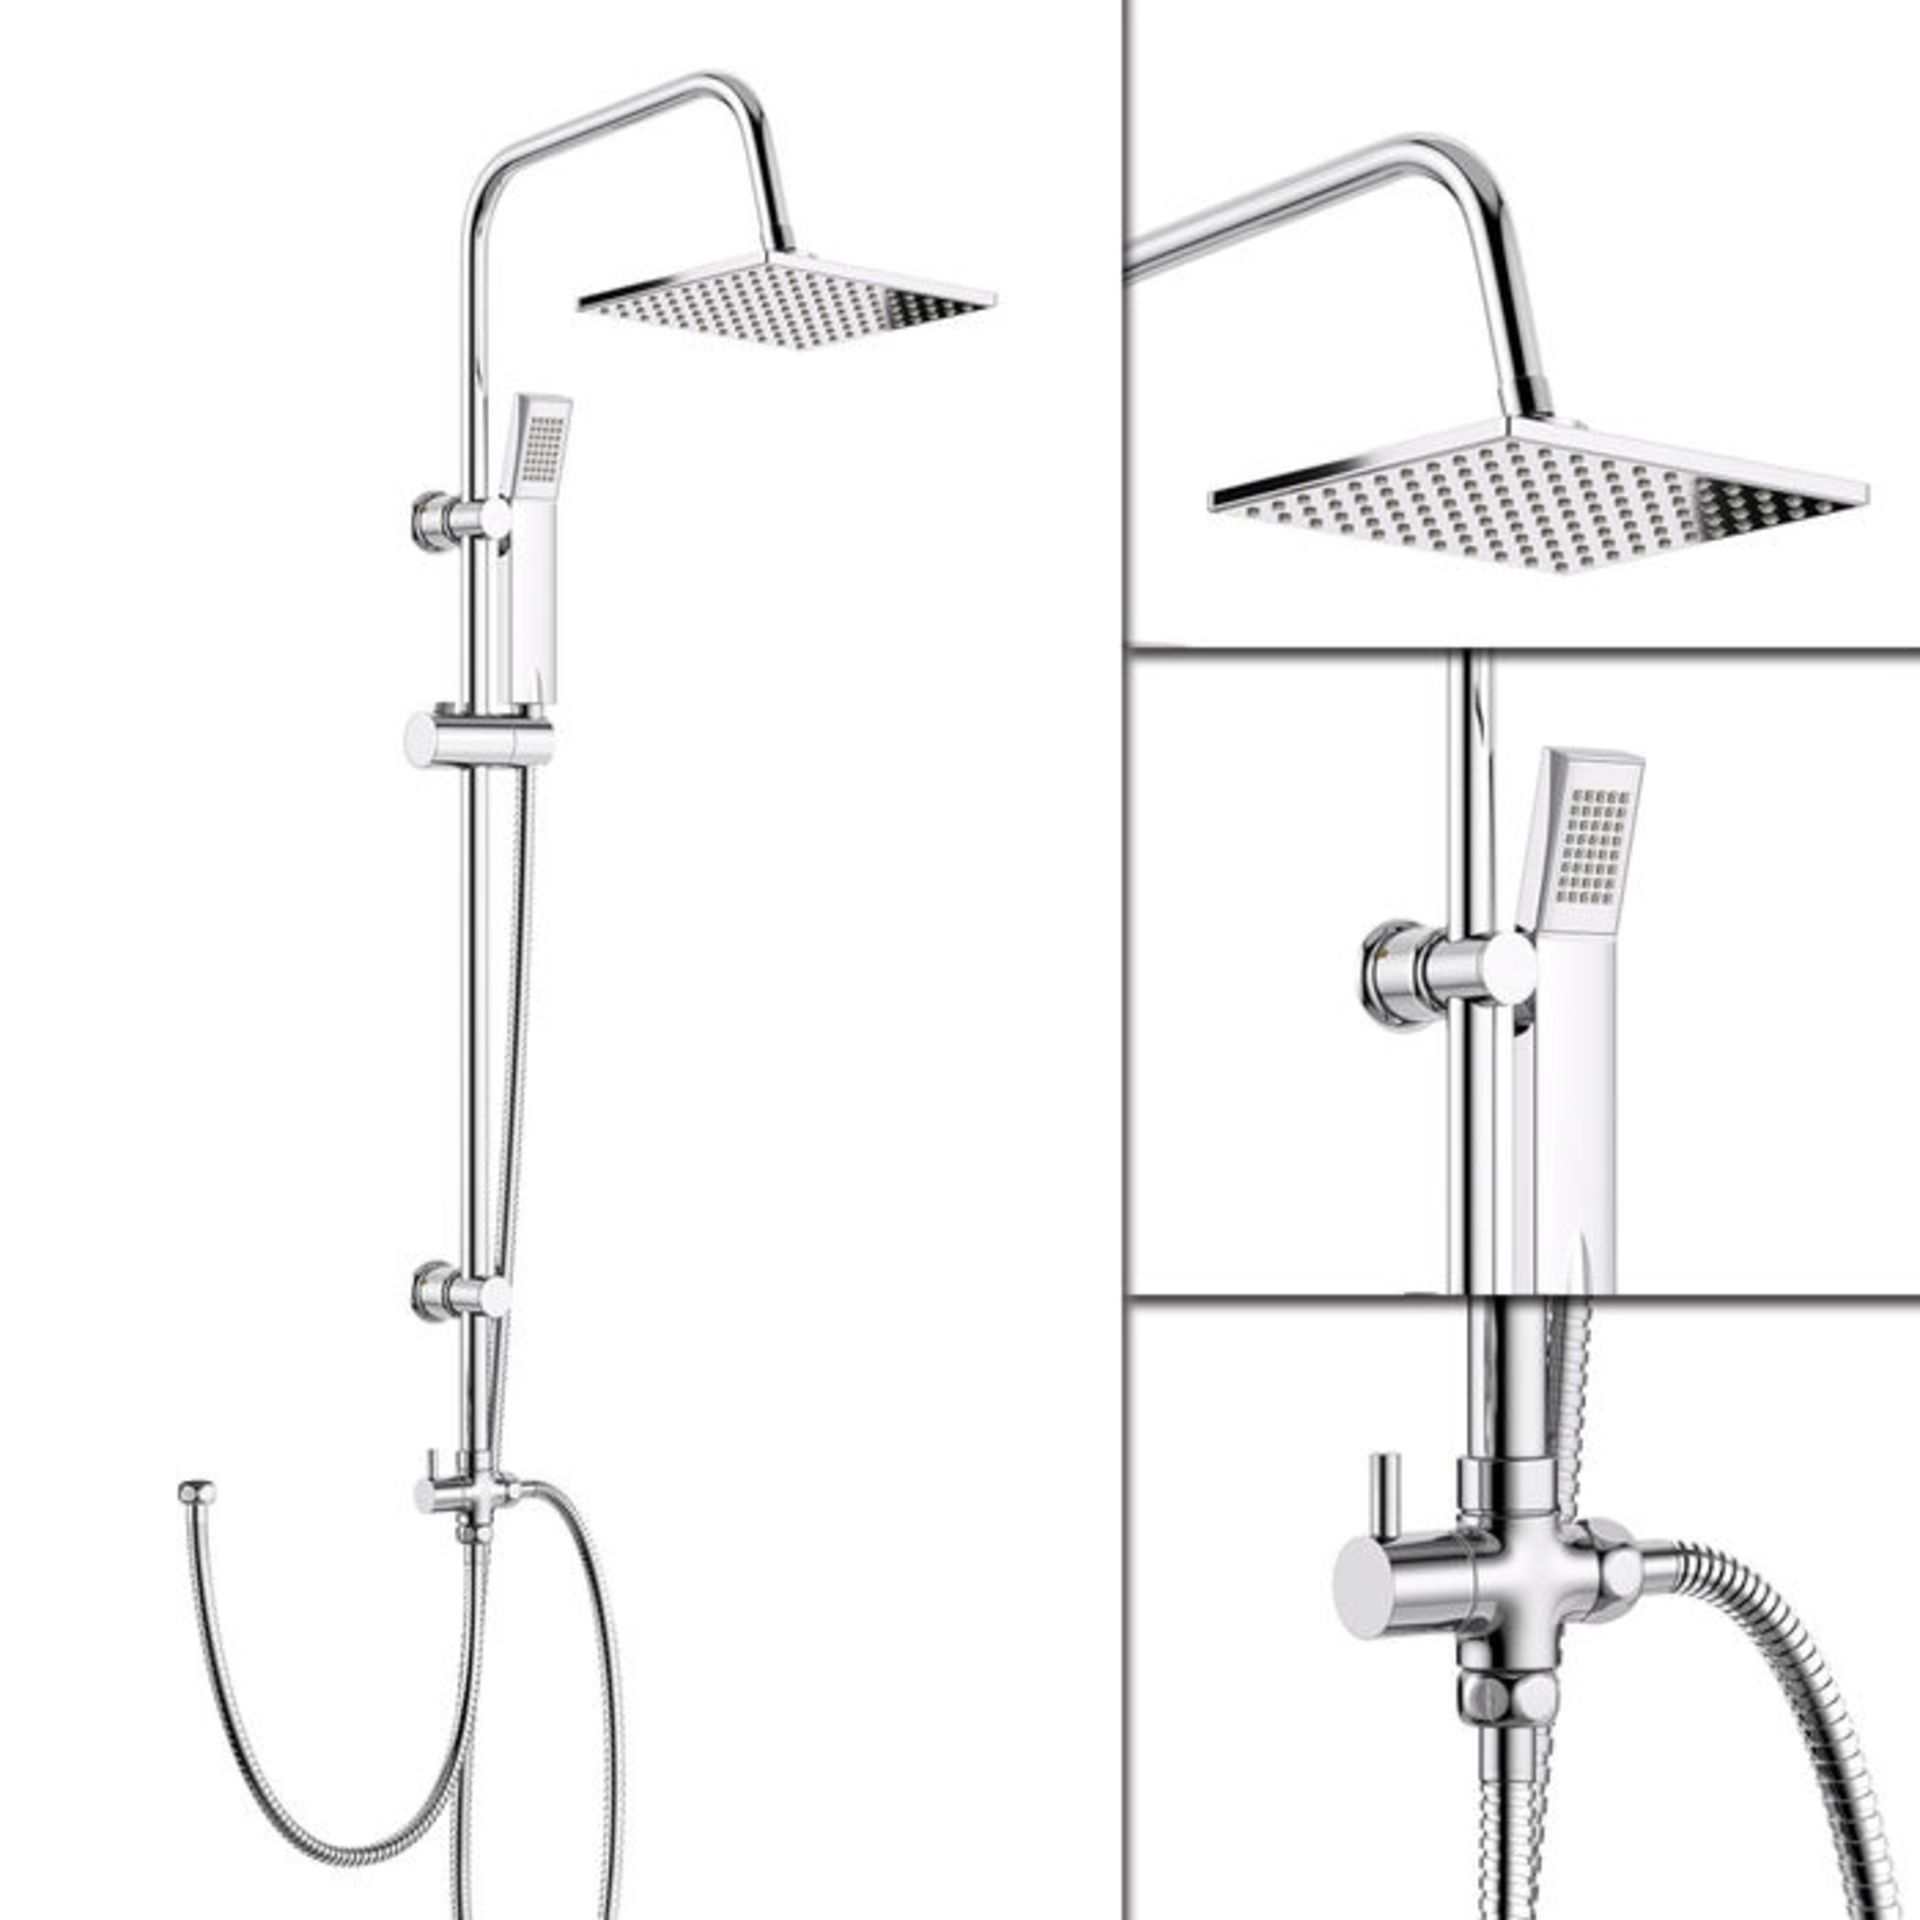 (PA29) 200mm Square Head, Riser Rail & Handheld Kit. Quality stainless steel shower head with Easy - Image 3 of 5